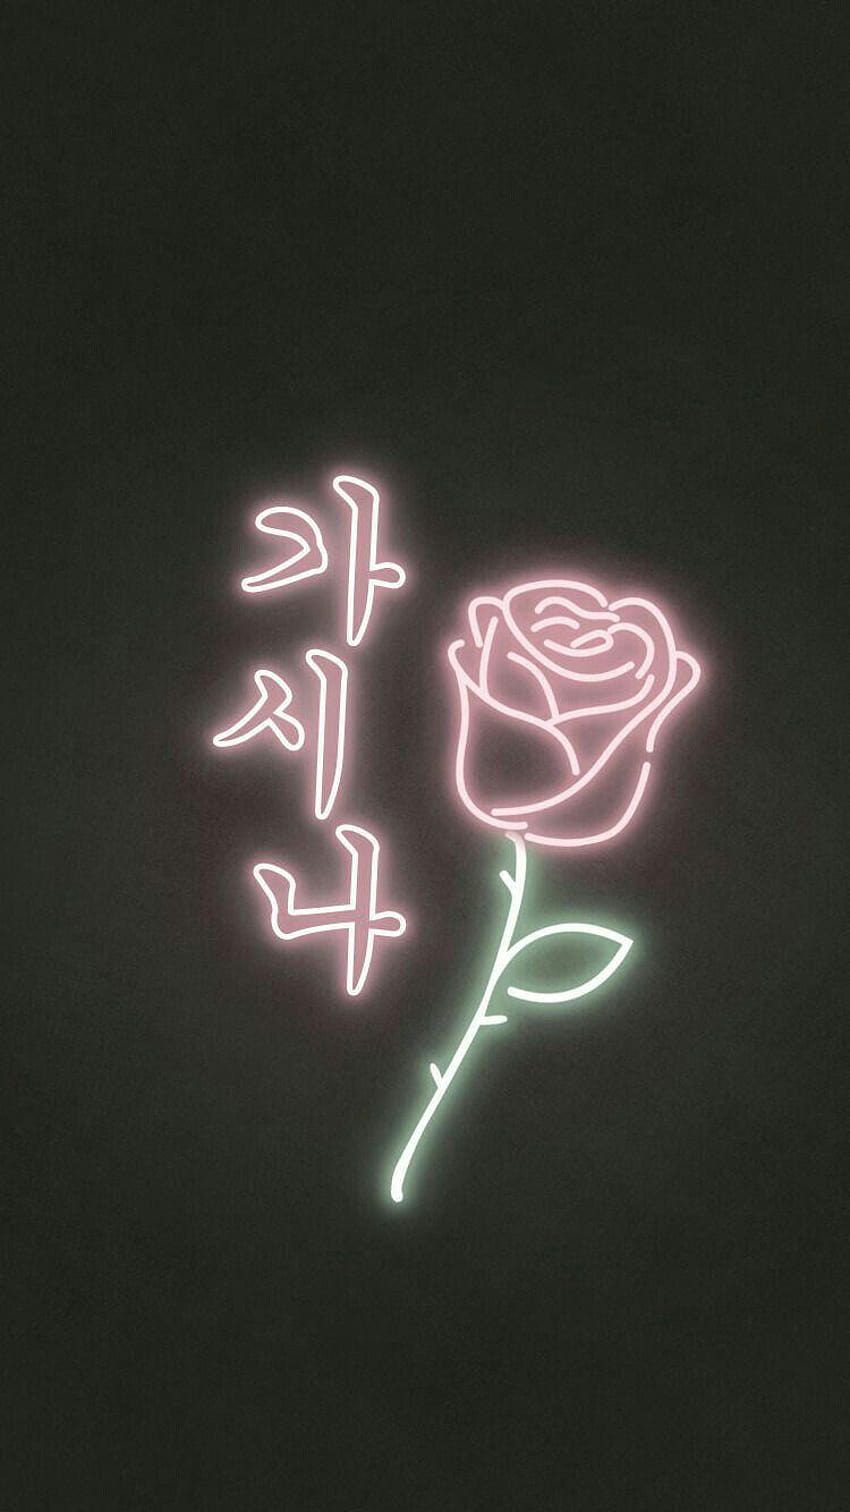 ♡ Pastel soft grunge aesthetic ♡ ☹☻ rose in 2019, grunge android HD phone wallpaper